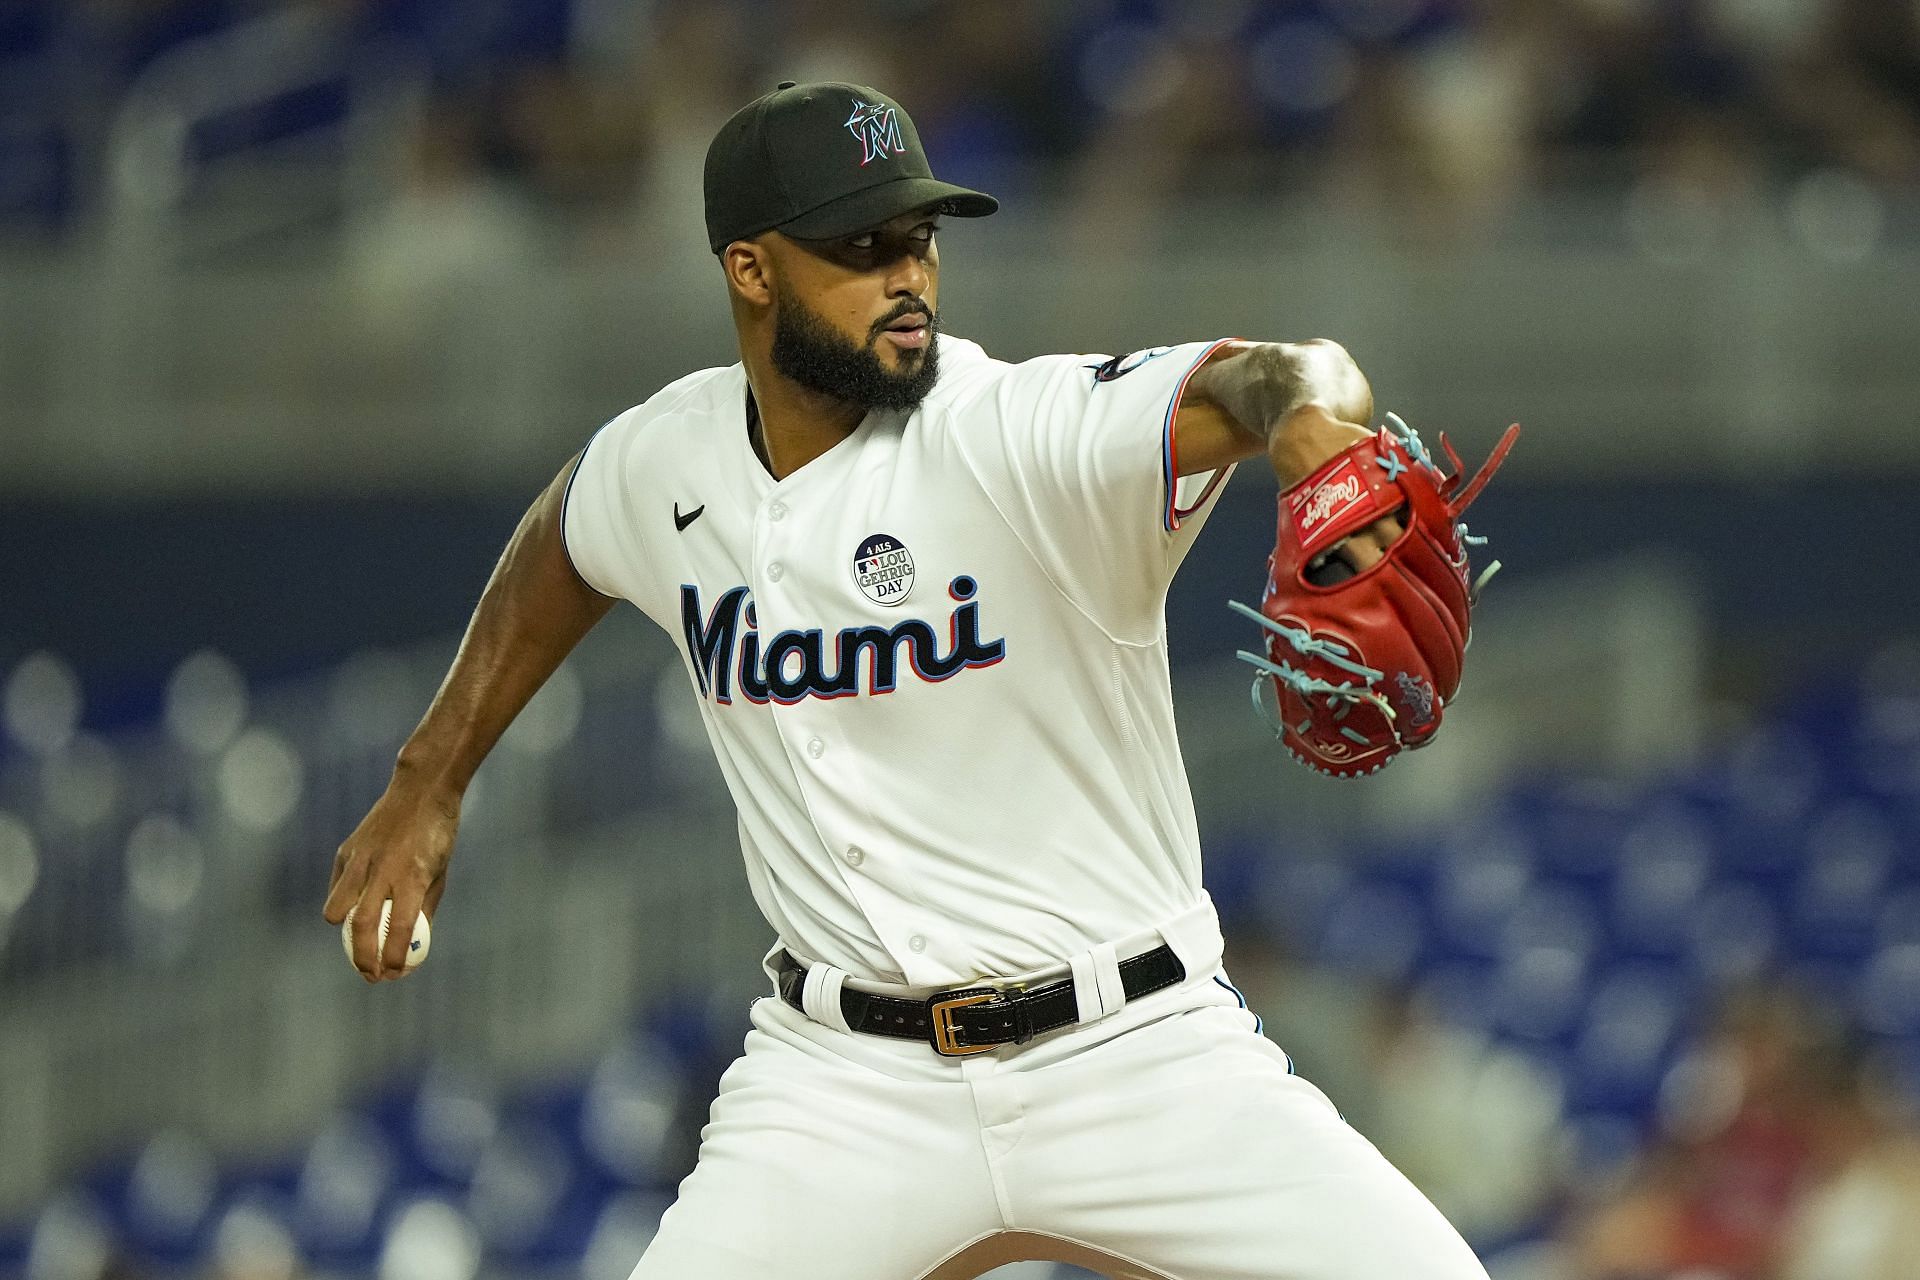 Miami Marlins starting pitcher Sandy Alcantara has been one of the best pitchers in baseball this season. He owns a 1.61 ERA